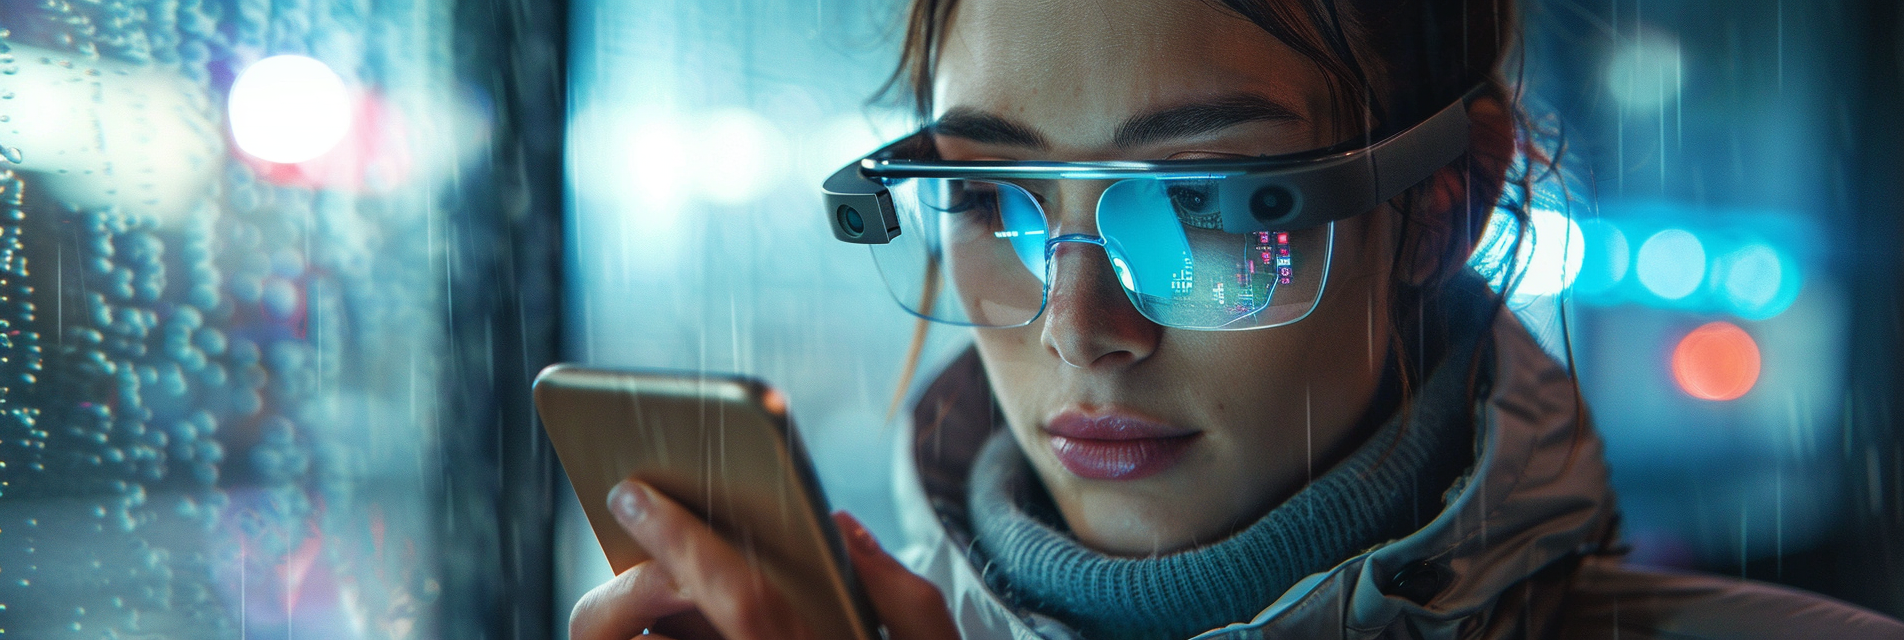 A Woman wearing smart glasses, looking at their phone | Smart Device Security Risks